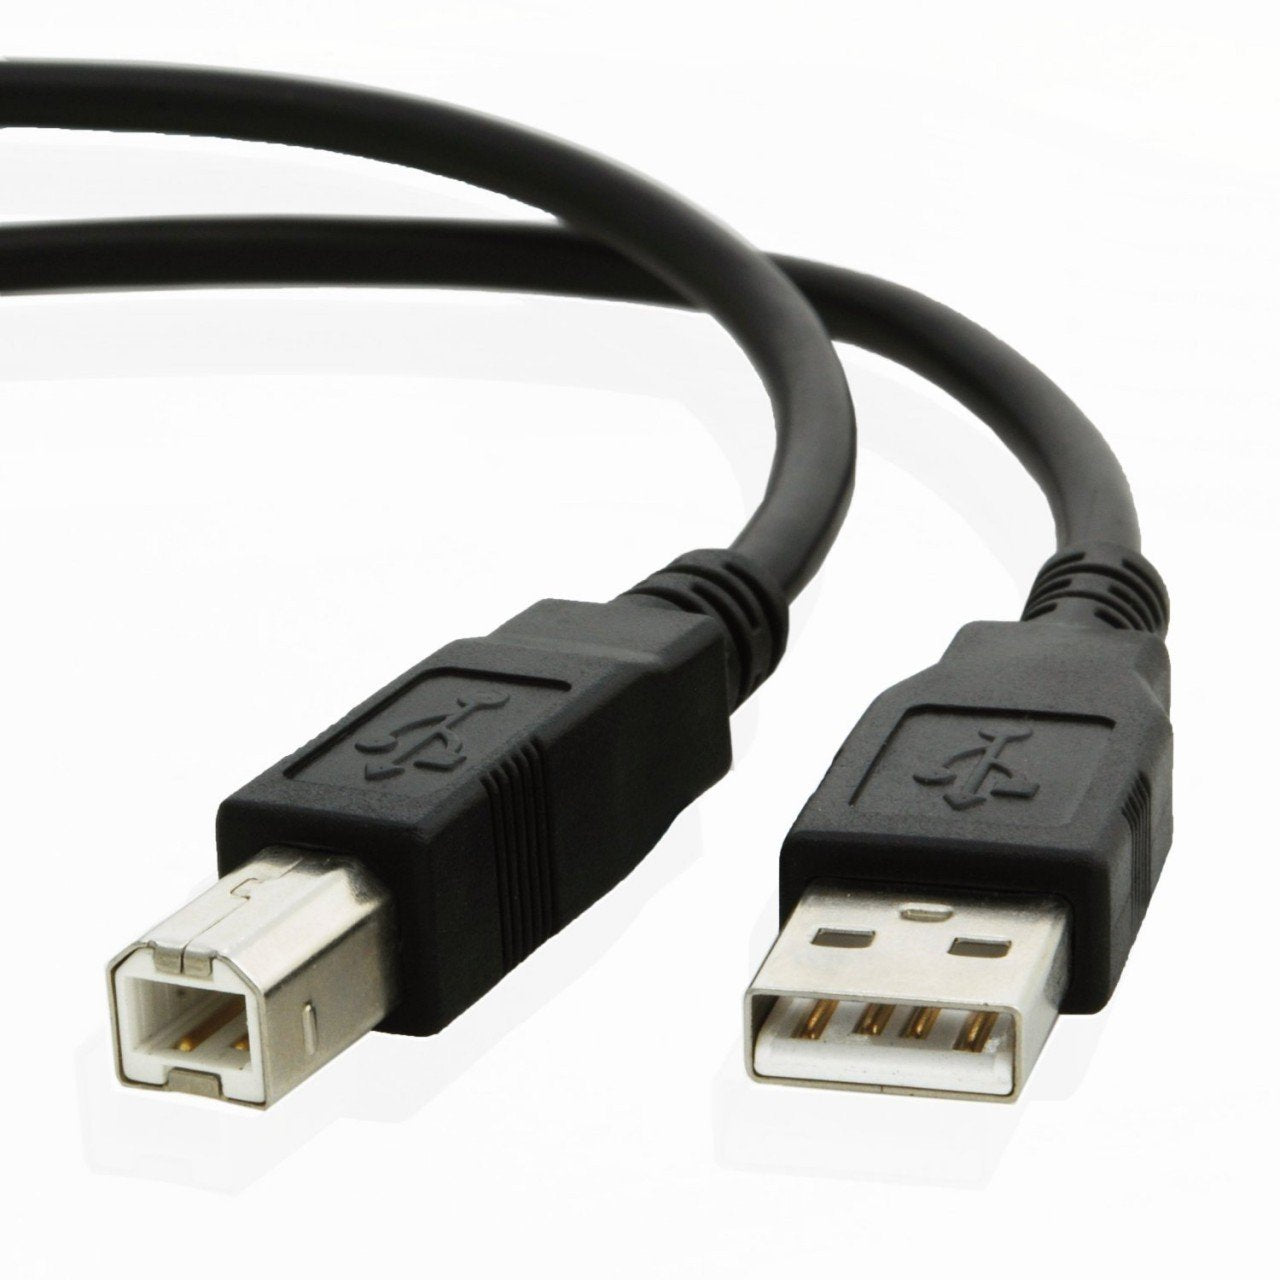 USB cable for Epson WORKFORCE PRO WF-4630